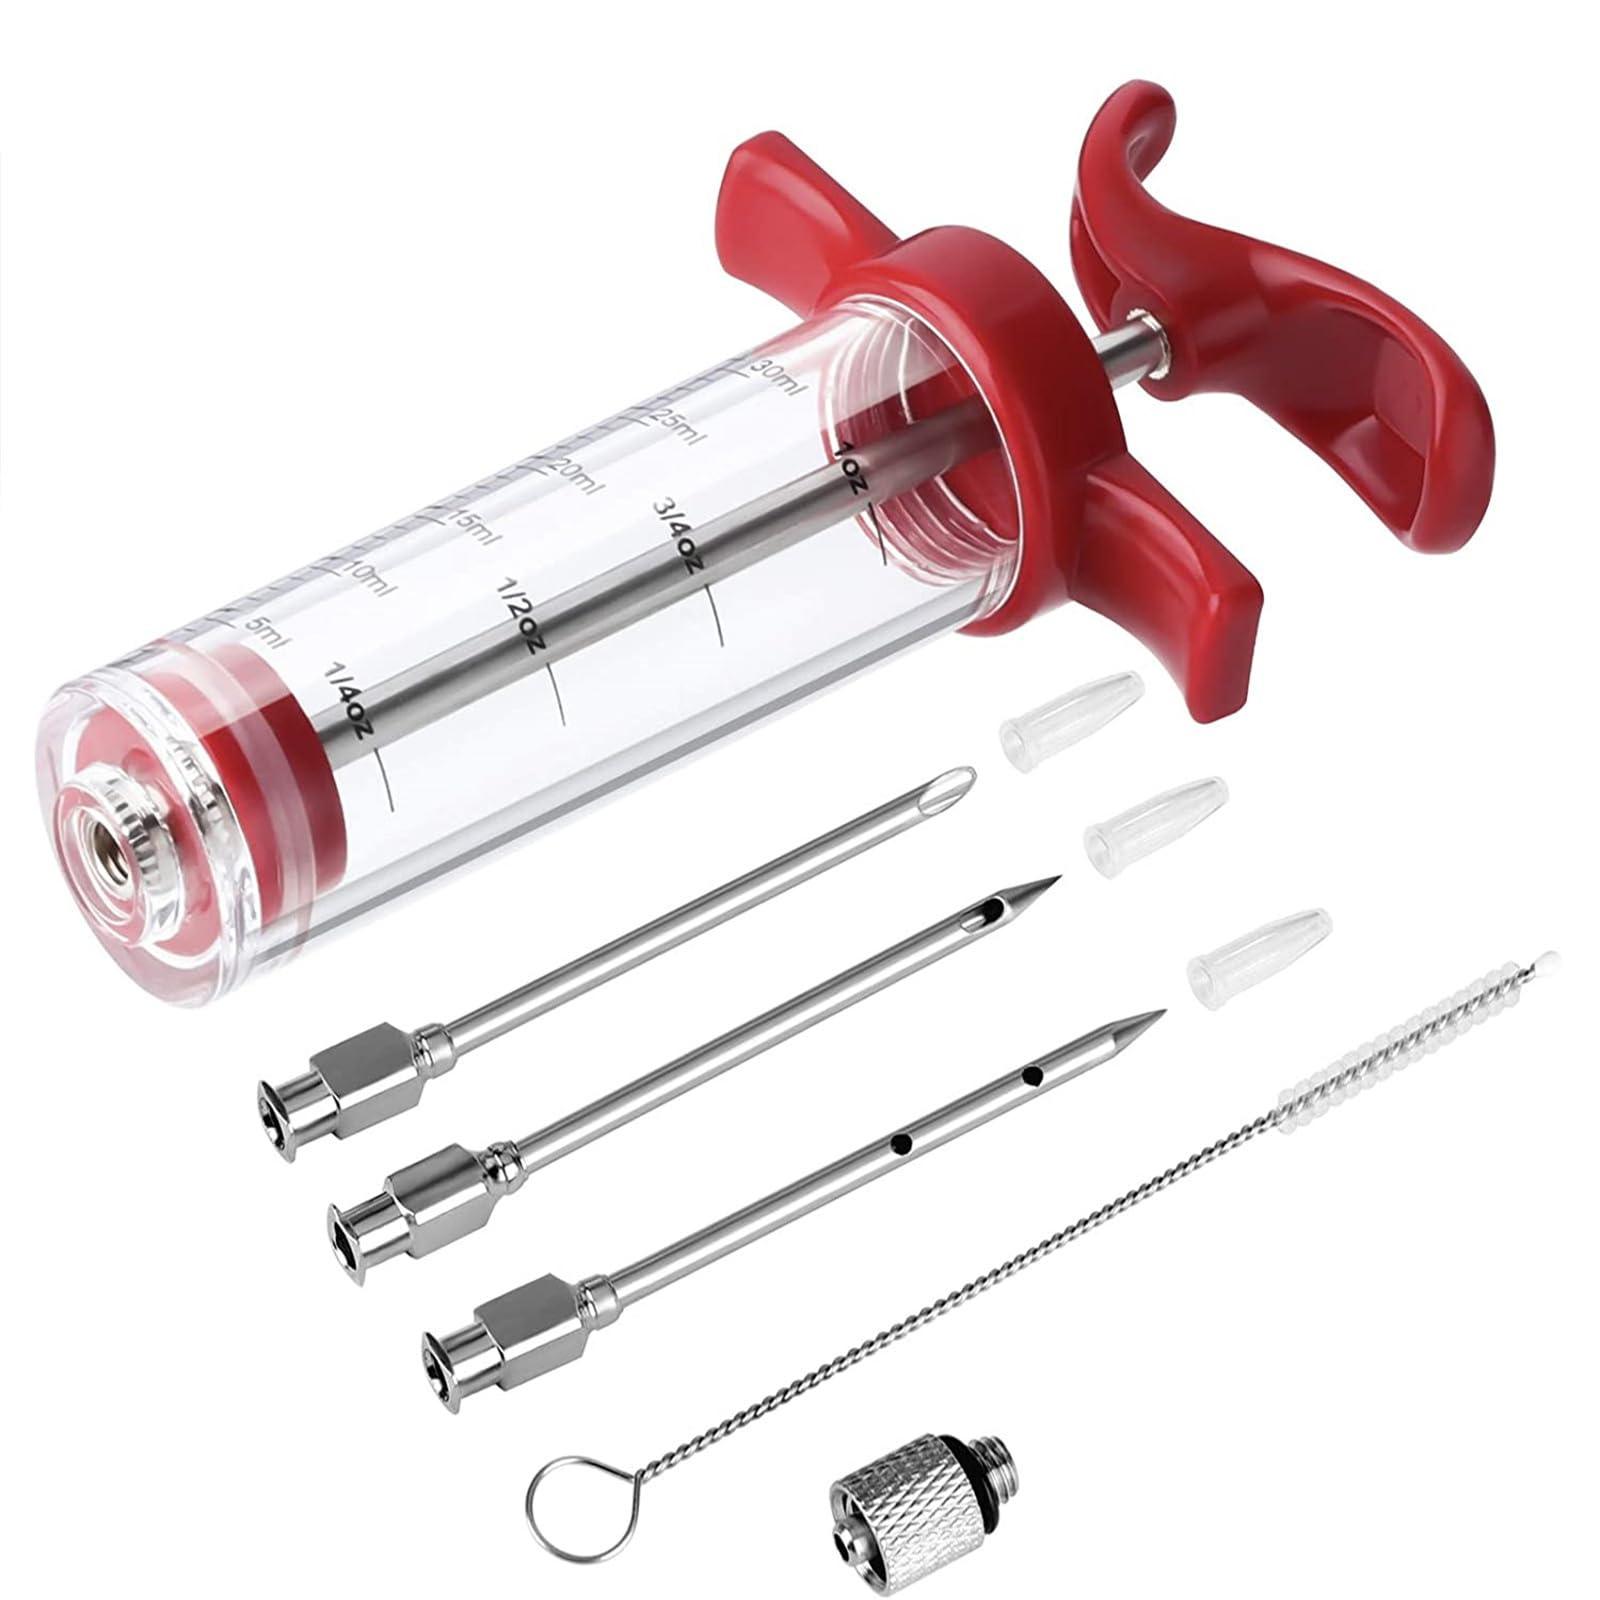 Meat Injector Syringe - 3 Marinade Injector Needles for BBQ Grill, Premium Portable Turkey Injector kit for Smoker,Marinades Injector for Meats With 1oz Large Capacity 1 Brush Easy to Use & Clean Red - CookCave